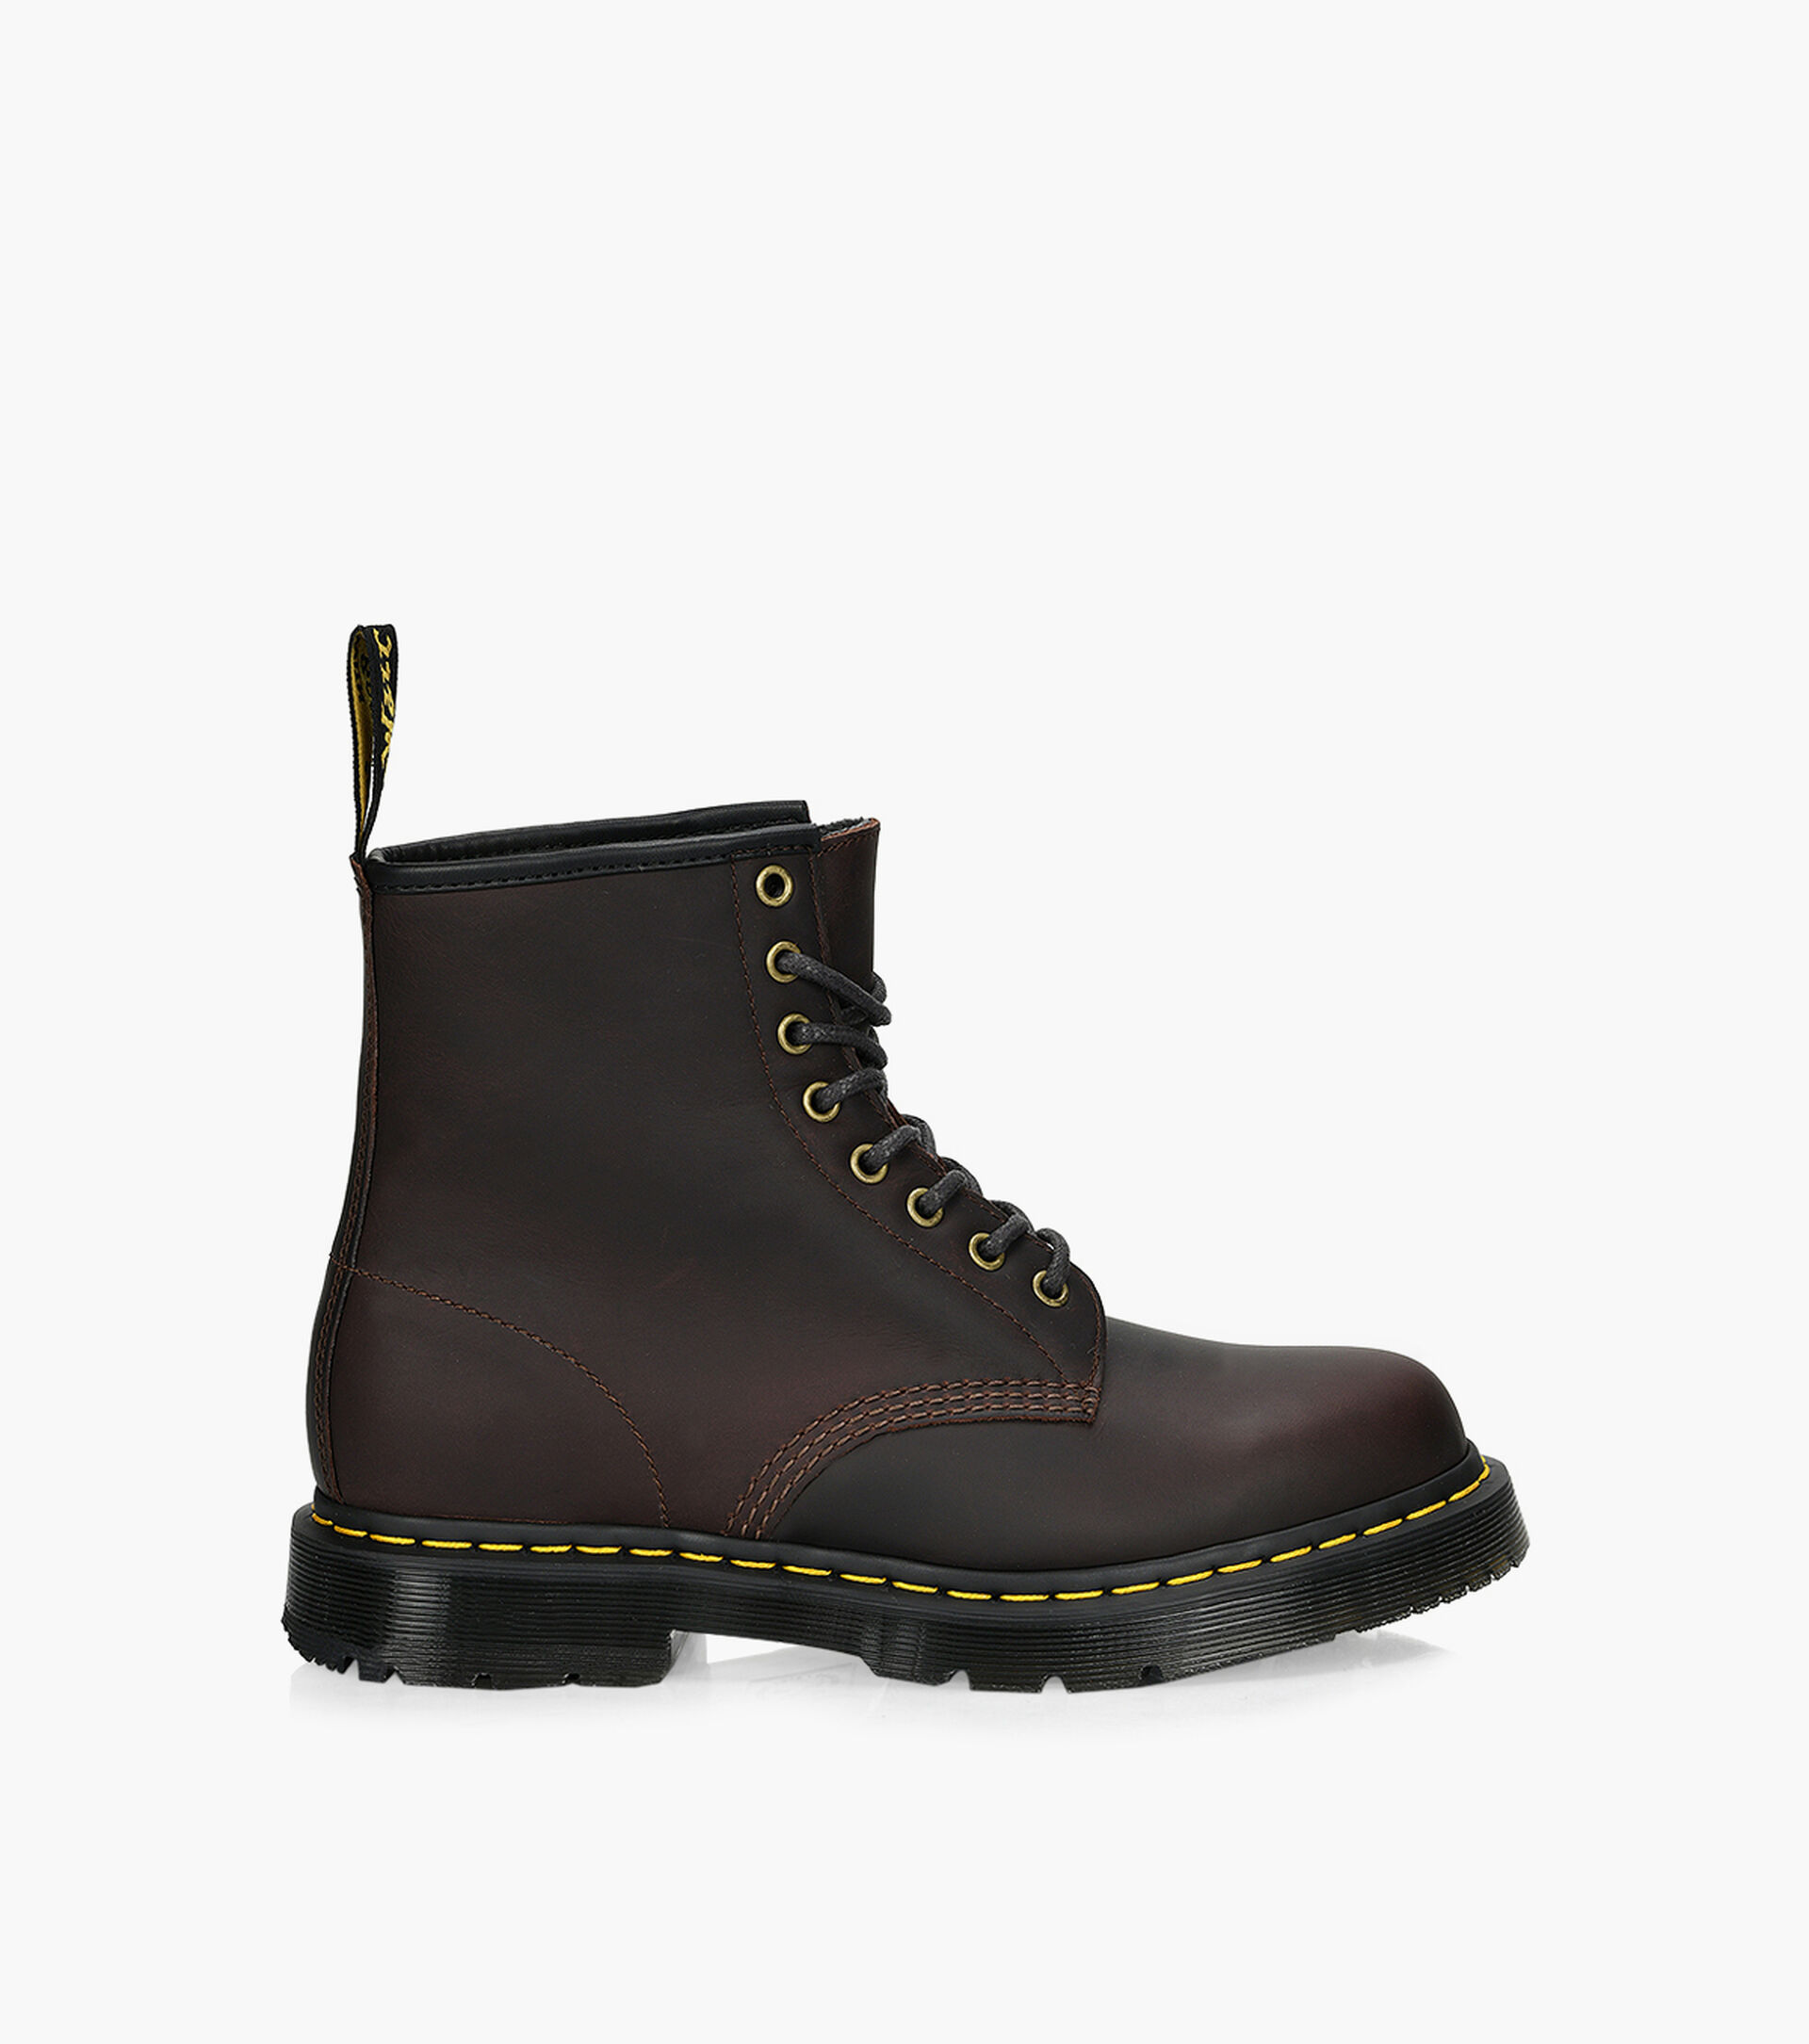 DR. MARTENS 1460 WINTERGRIP LACE UP BOOTS - Leather | Browns Shoes